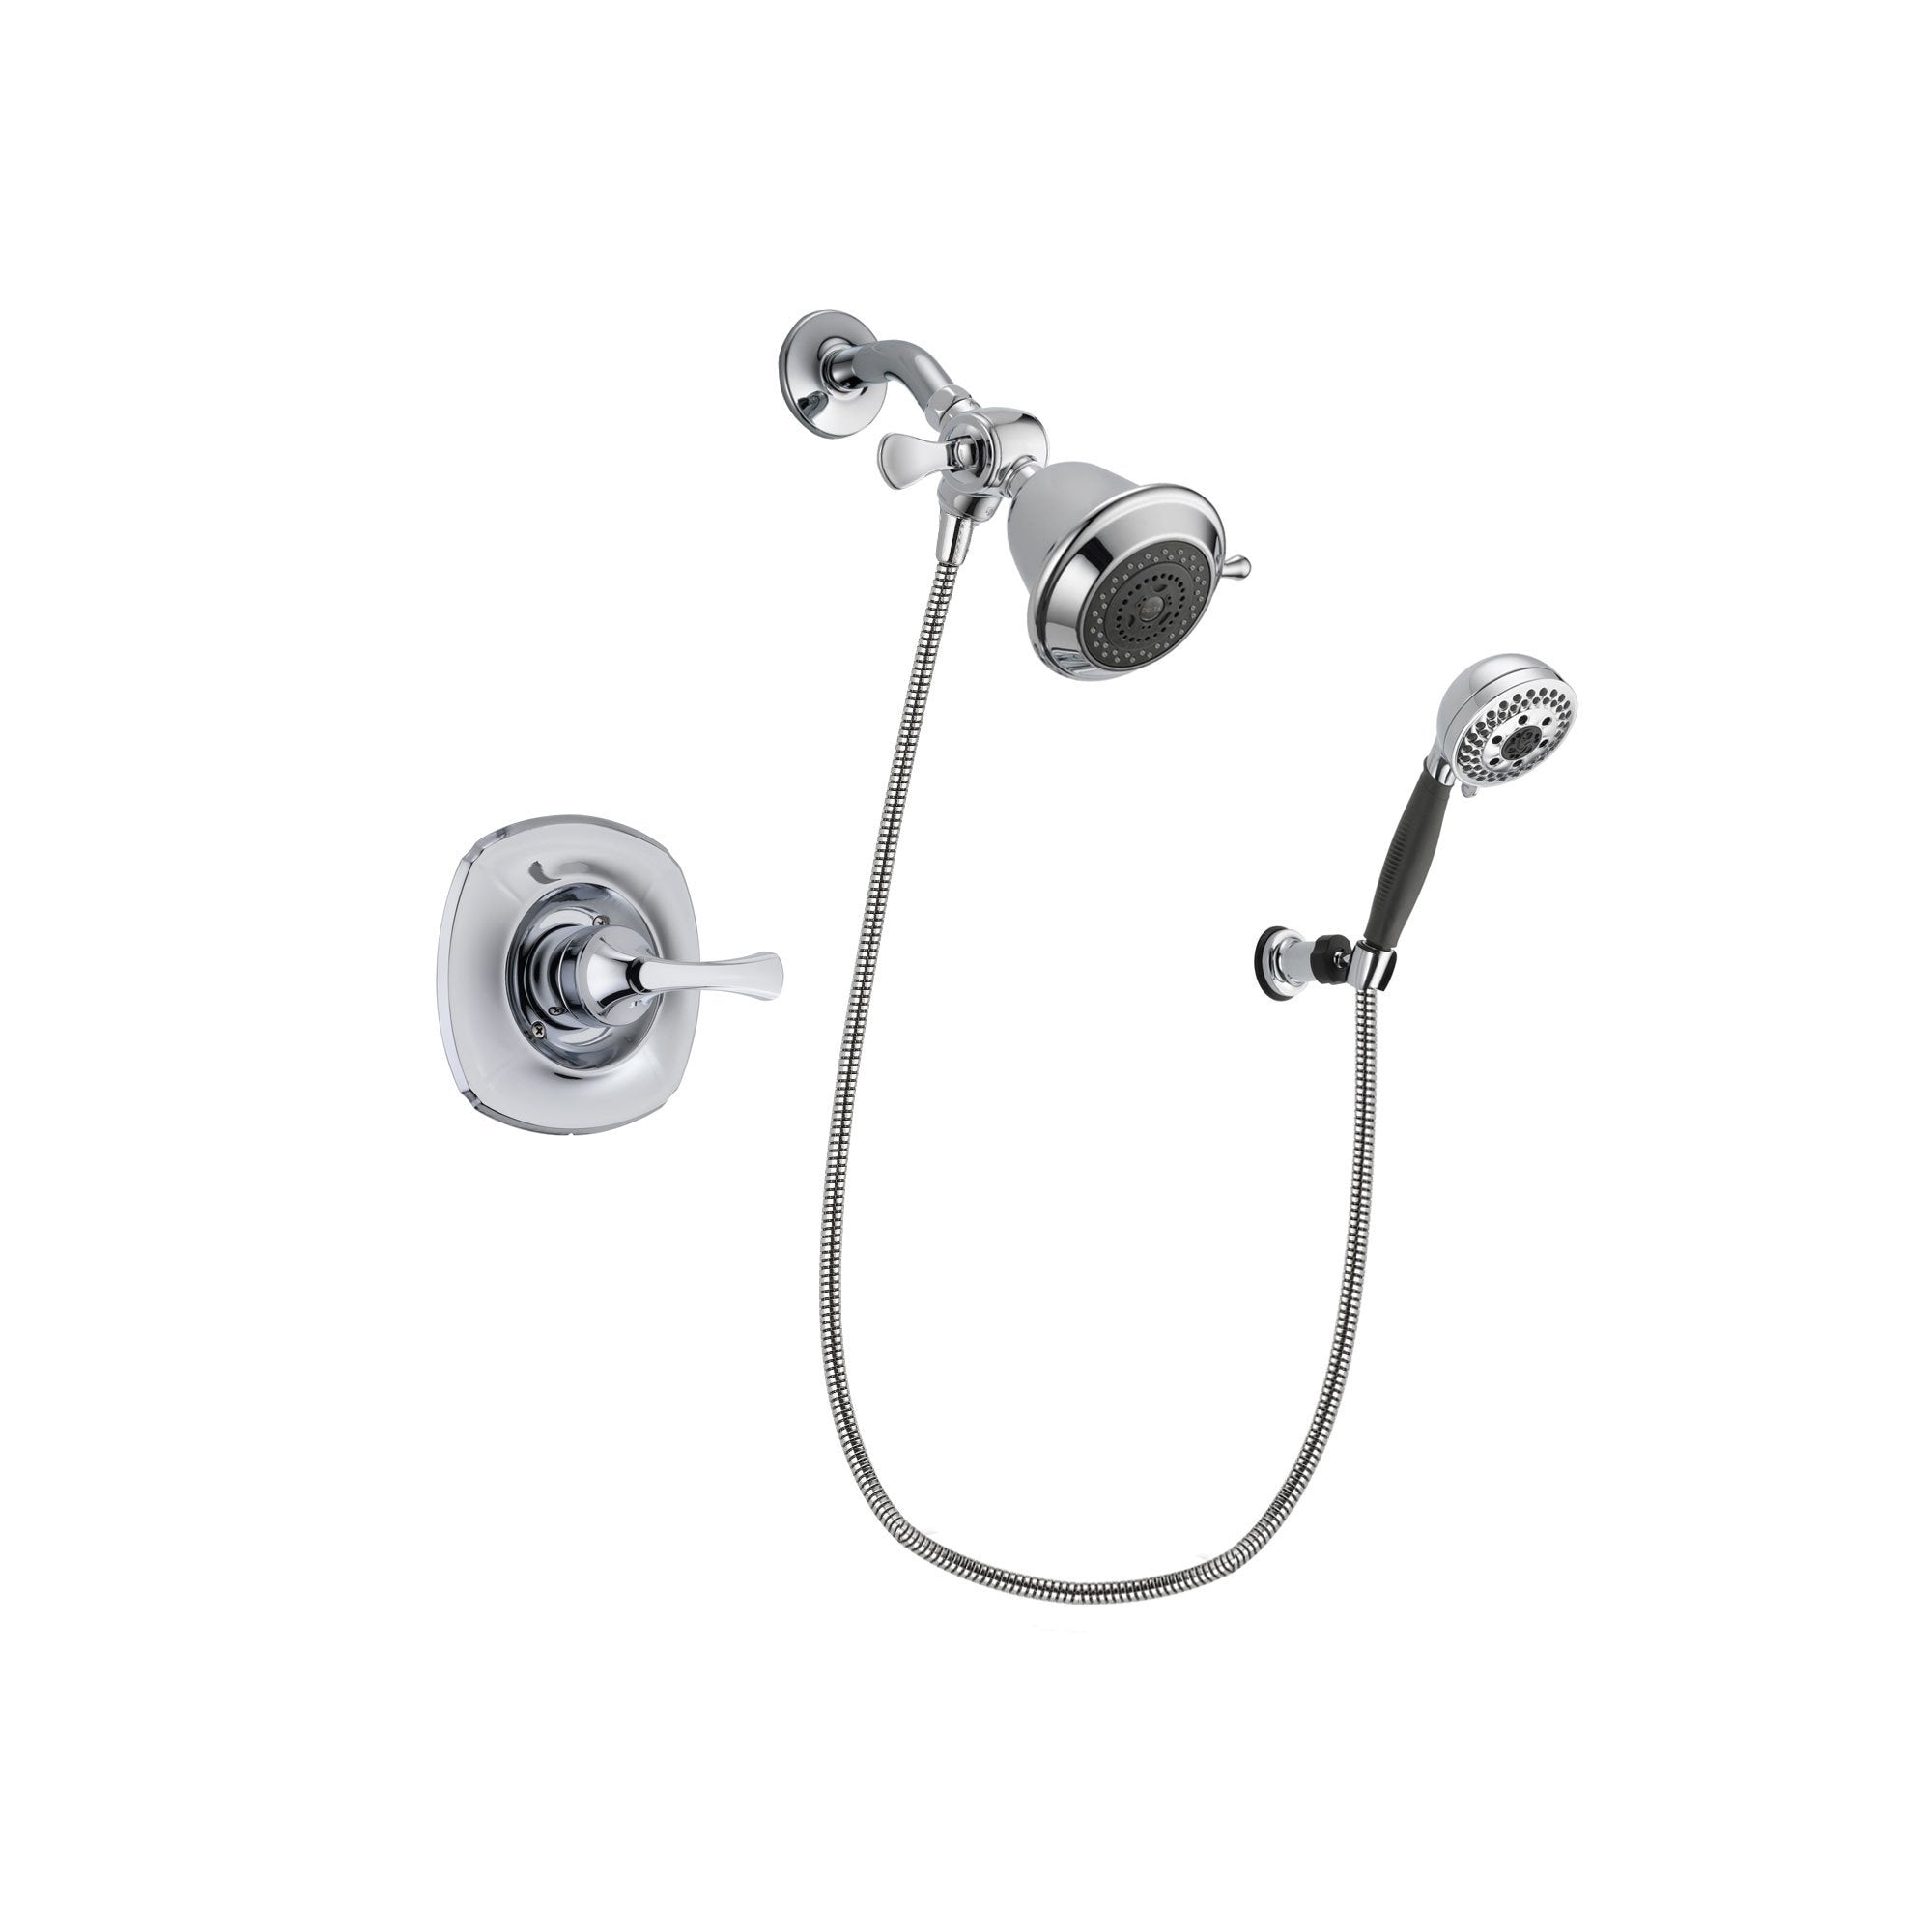 Delta Addison Chrome Shower Faucet System w/ Showerhead and Hand Shower DSP1122V